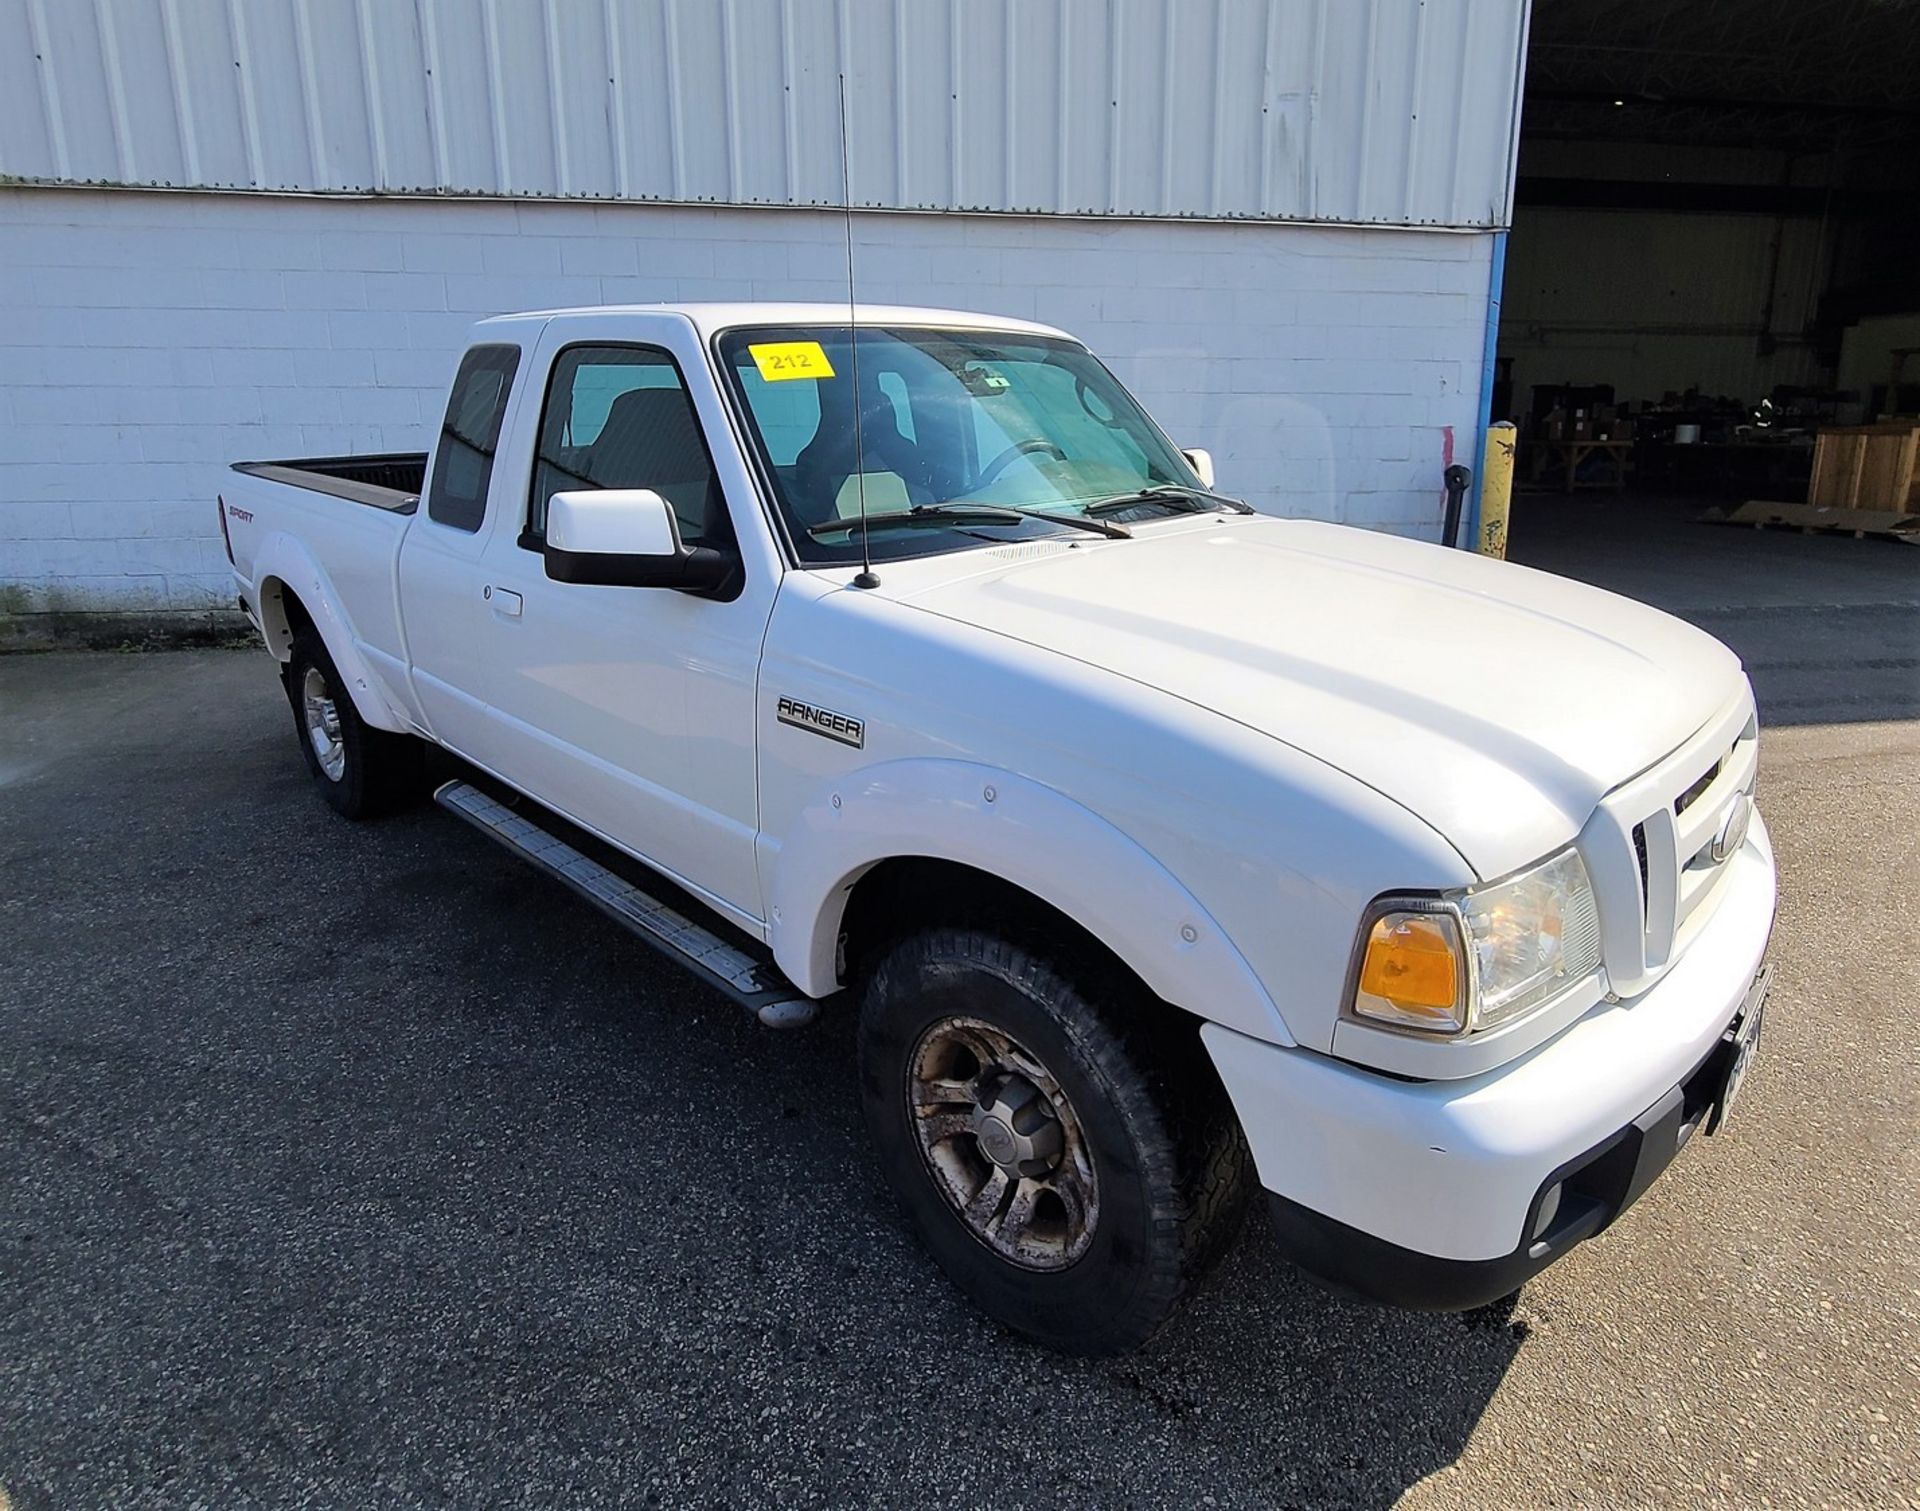 2007 FORD RANGER SPORT PICKUP TRUCK, VIN# 1FTYR44U17PA81881, 2-DOOR, APPROX. 239,000KMS - Image 2 of 7